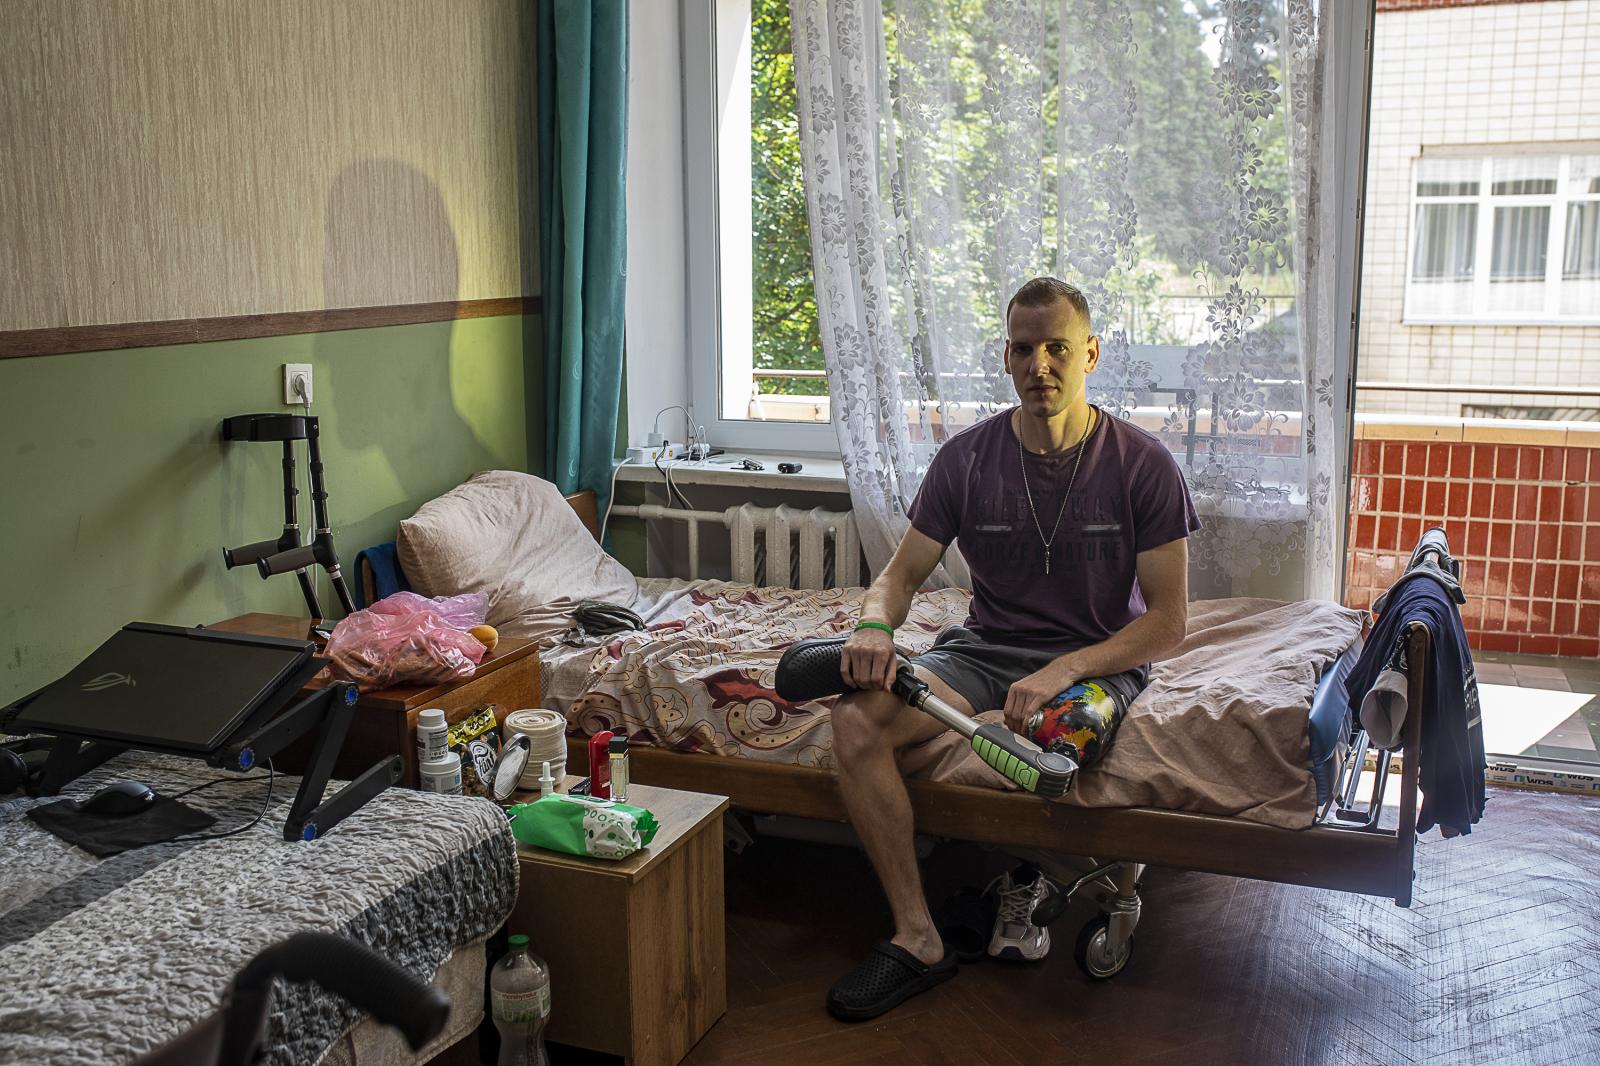 Walking wounded: a journey of recovery and hope - KYIV OBLAST, UKRAINE - JULY 21: The soldier portrayed...